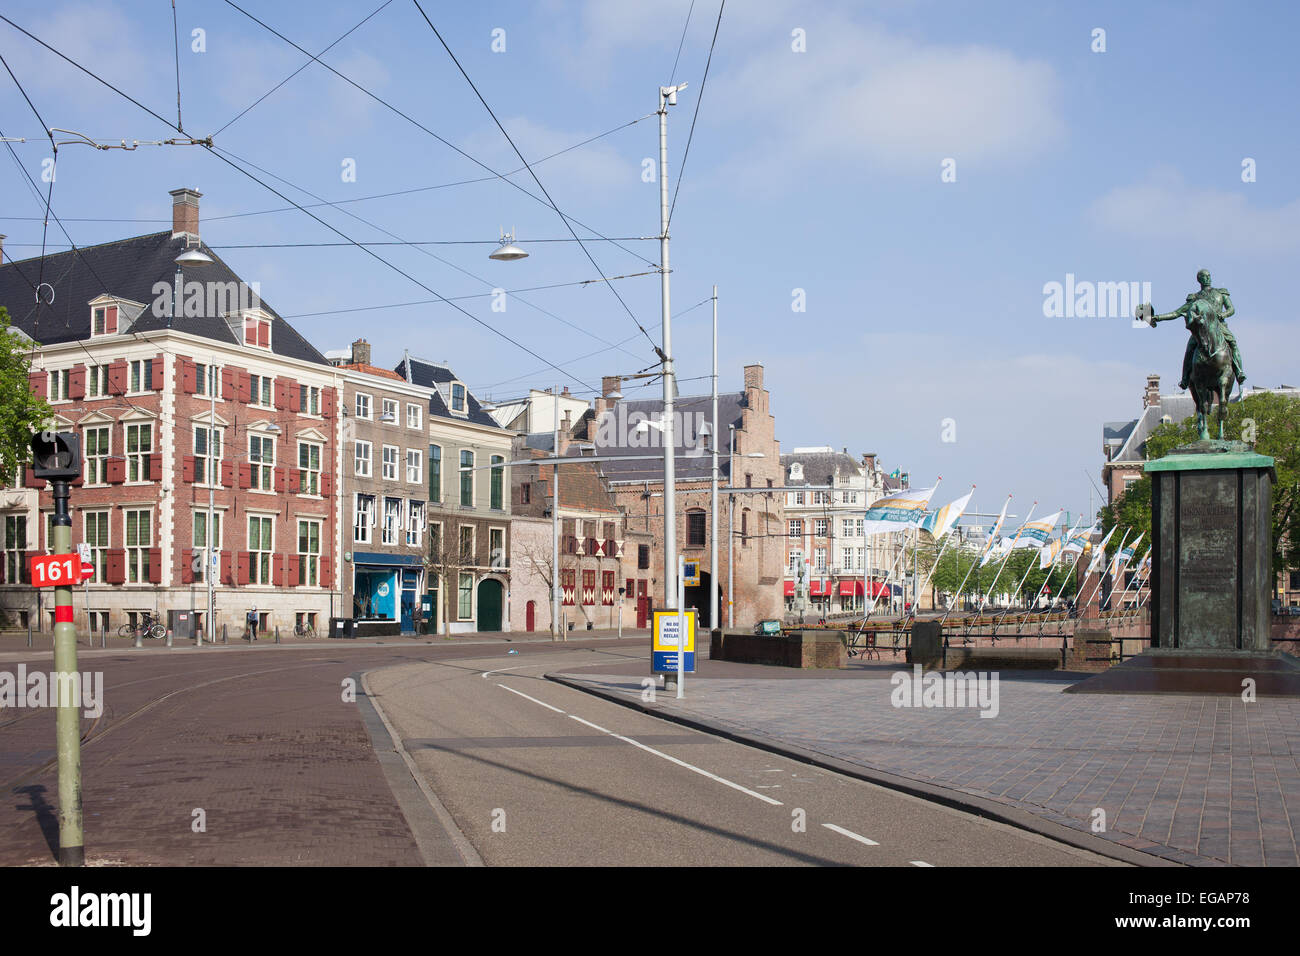 Buitenhof In The City Centre Of Hague Den Haag In Holland Netherlands Stock Photo Alamy